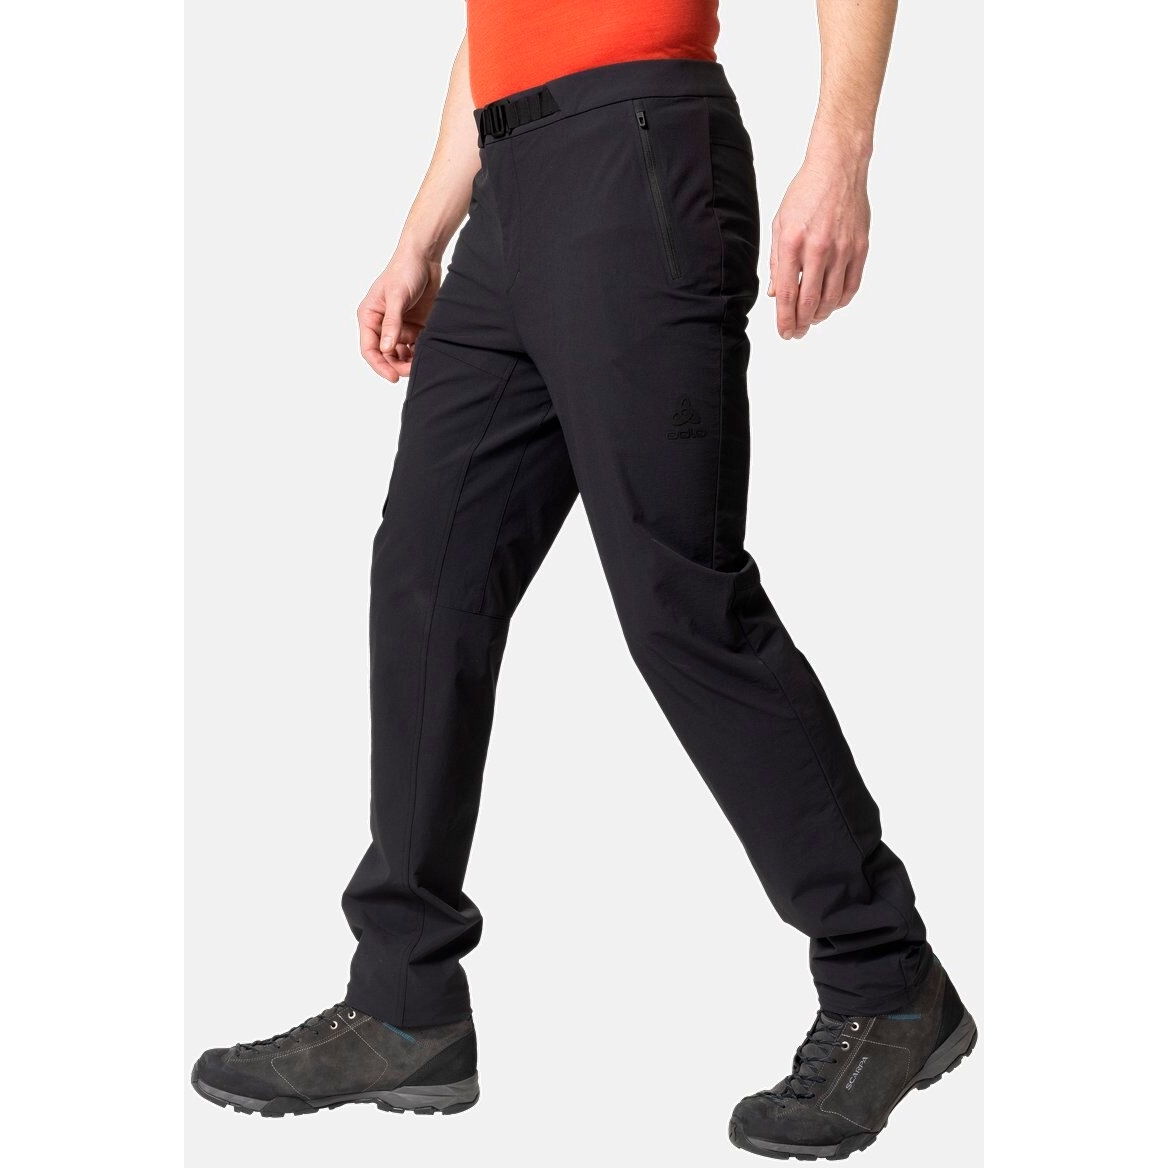 dark gray cargo pants for men men's color block hiking trousers windproof  work trousers warm lined trekking trousers with pockets men's outdoor  fitness softshell trousers - Walmart.com